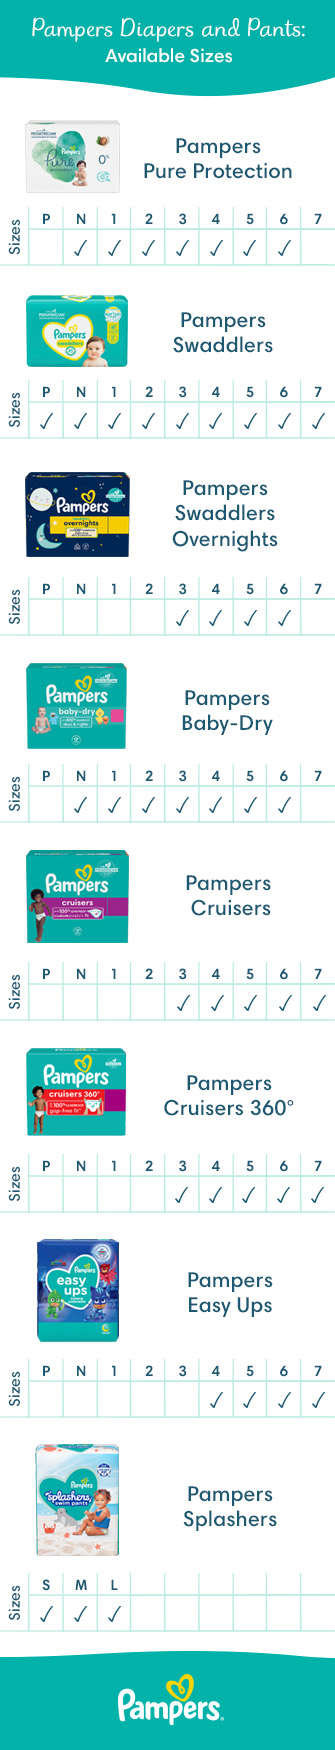 pampers new baby size 1 weight